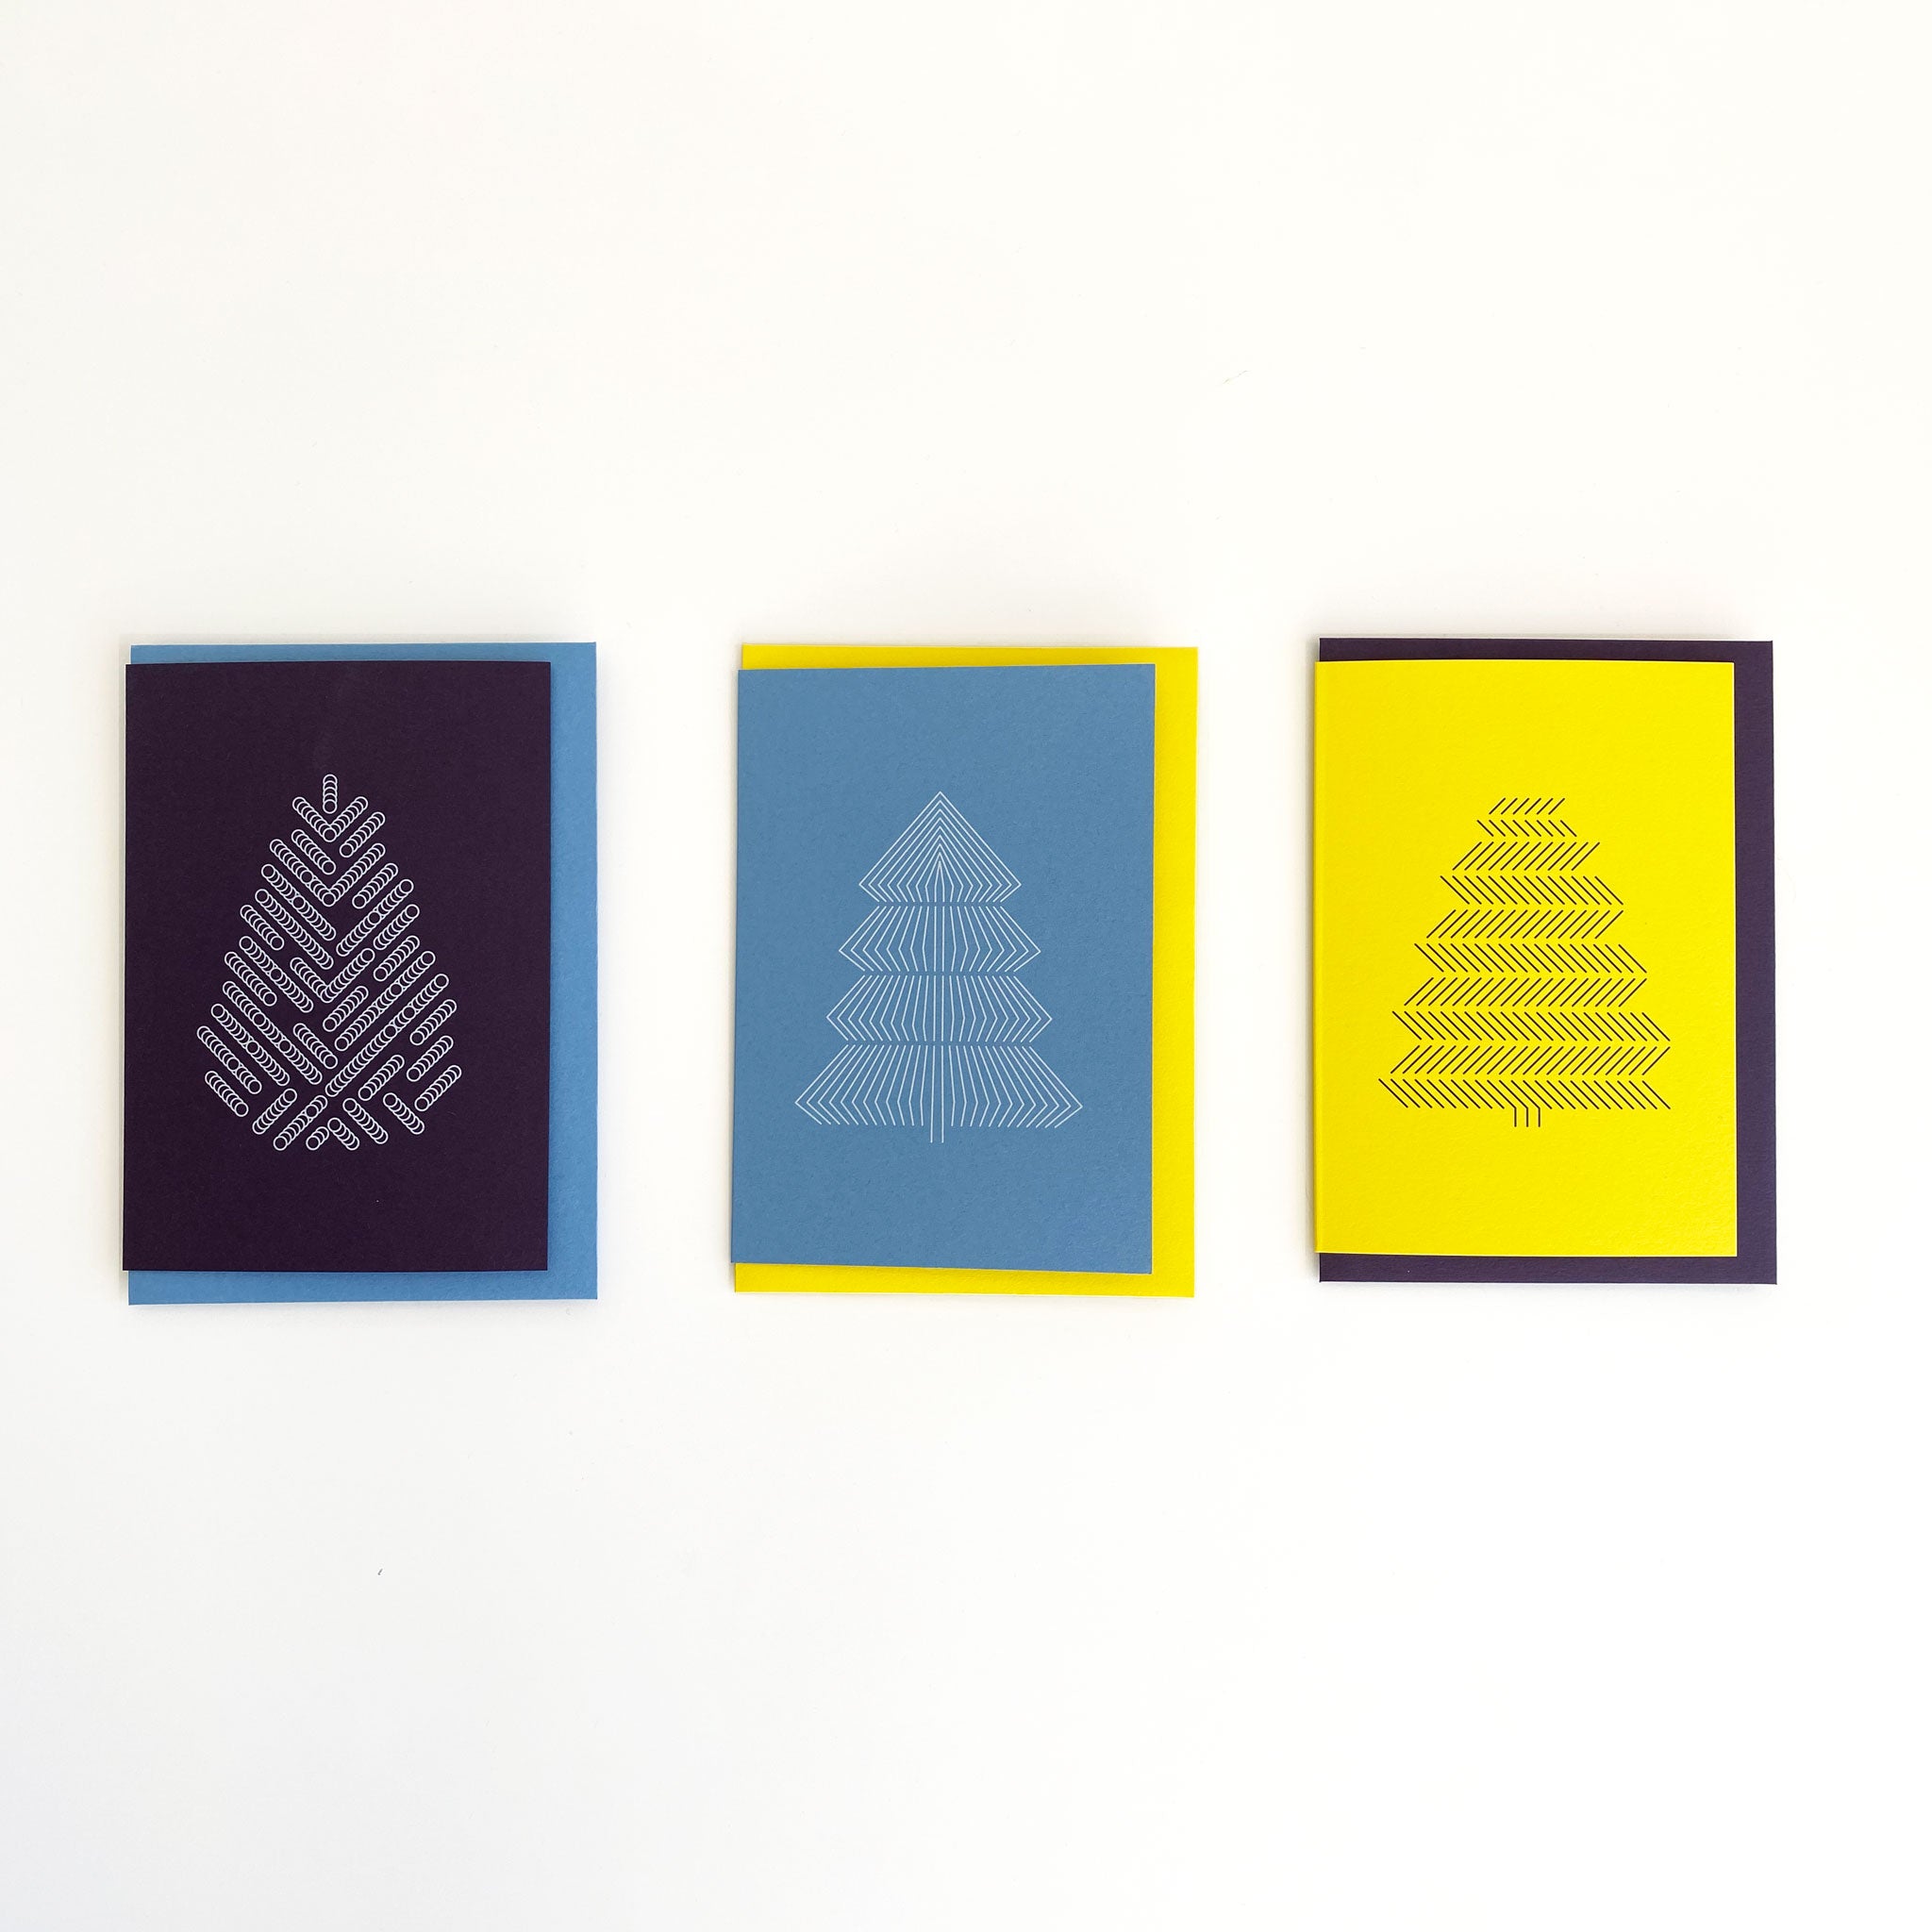 Flat lay of three christmas greeting cards with geometric tree prints. Deep purple with white tree, sky blue with white tree and bright yellow with black tree. Alternating coloured envelopes.